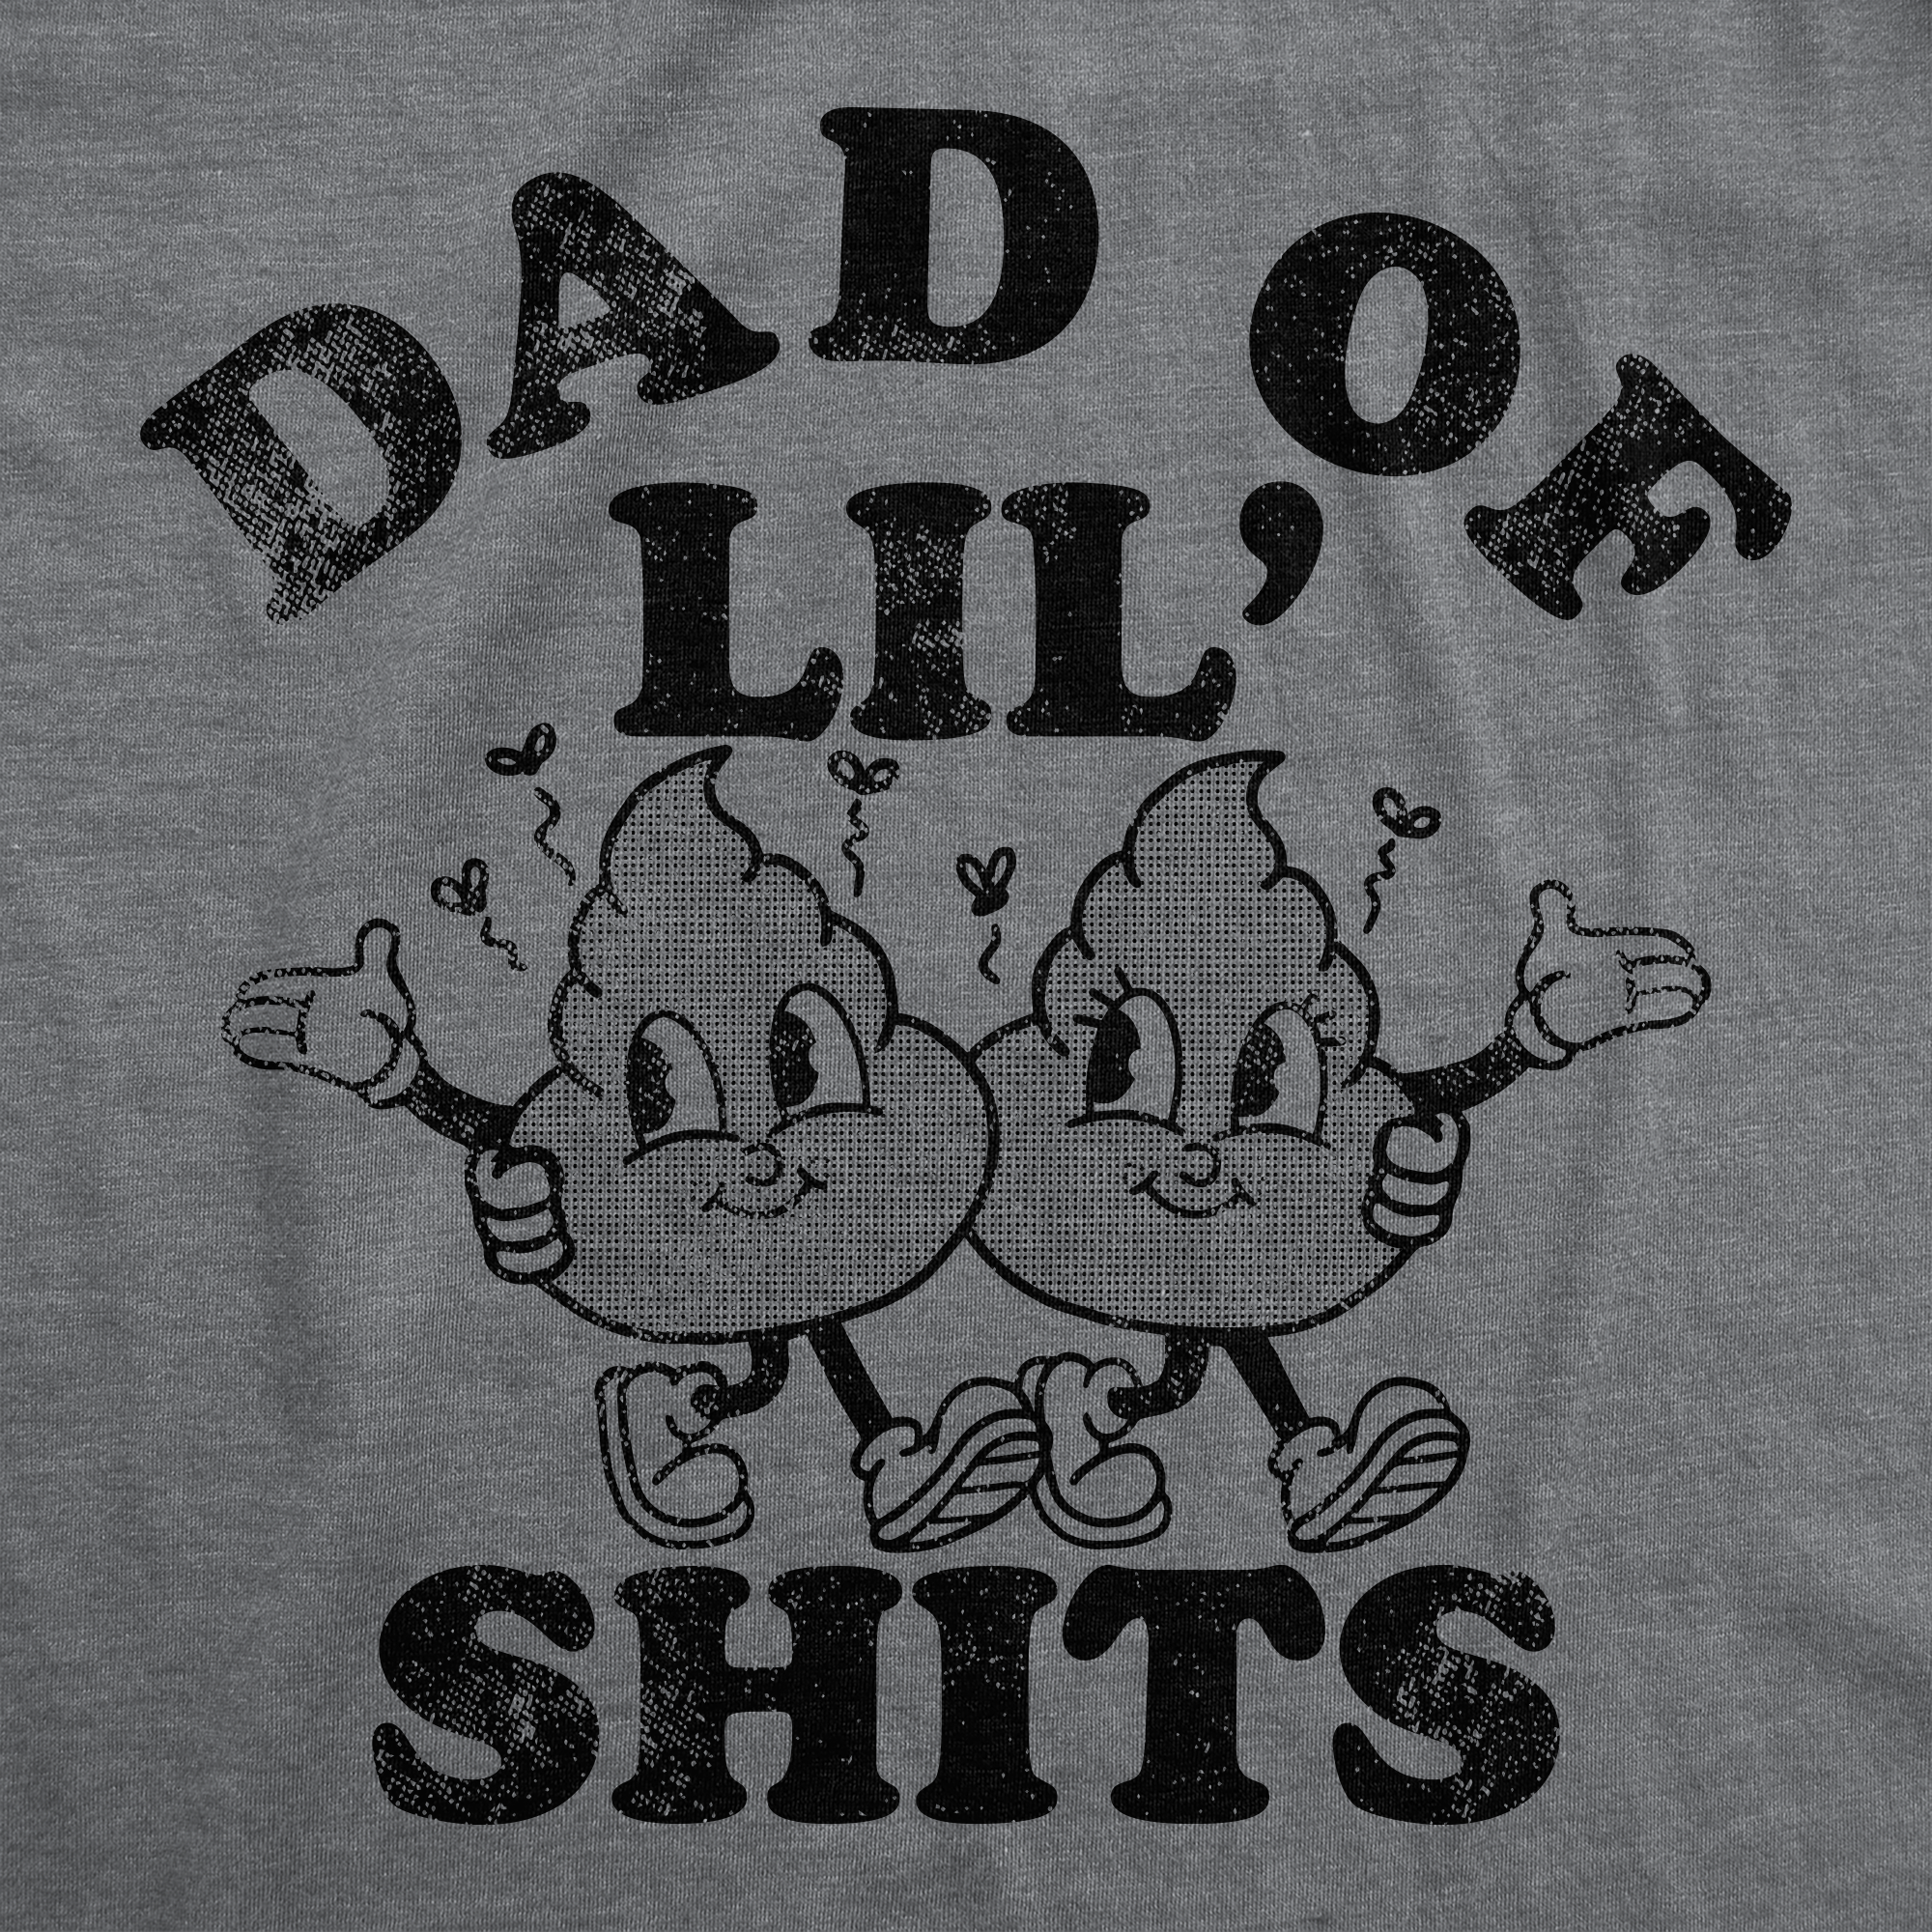 Funny Dark Heather Grey - Dad Of Lil Shits Dad Of Lil Shits Mens T Shirt Nerdy Father's Day sarcastic Tee